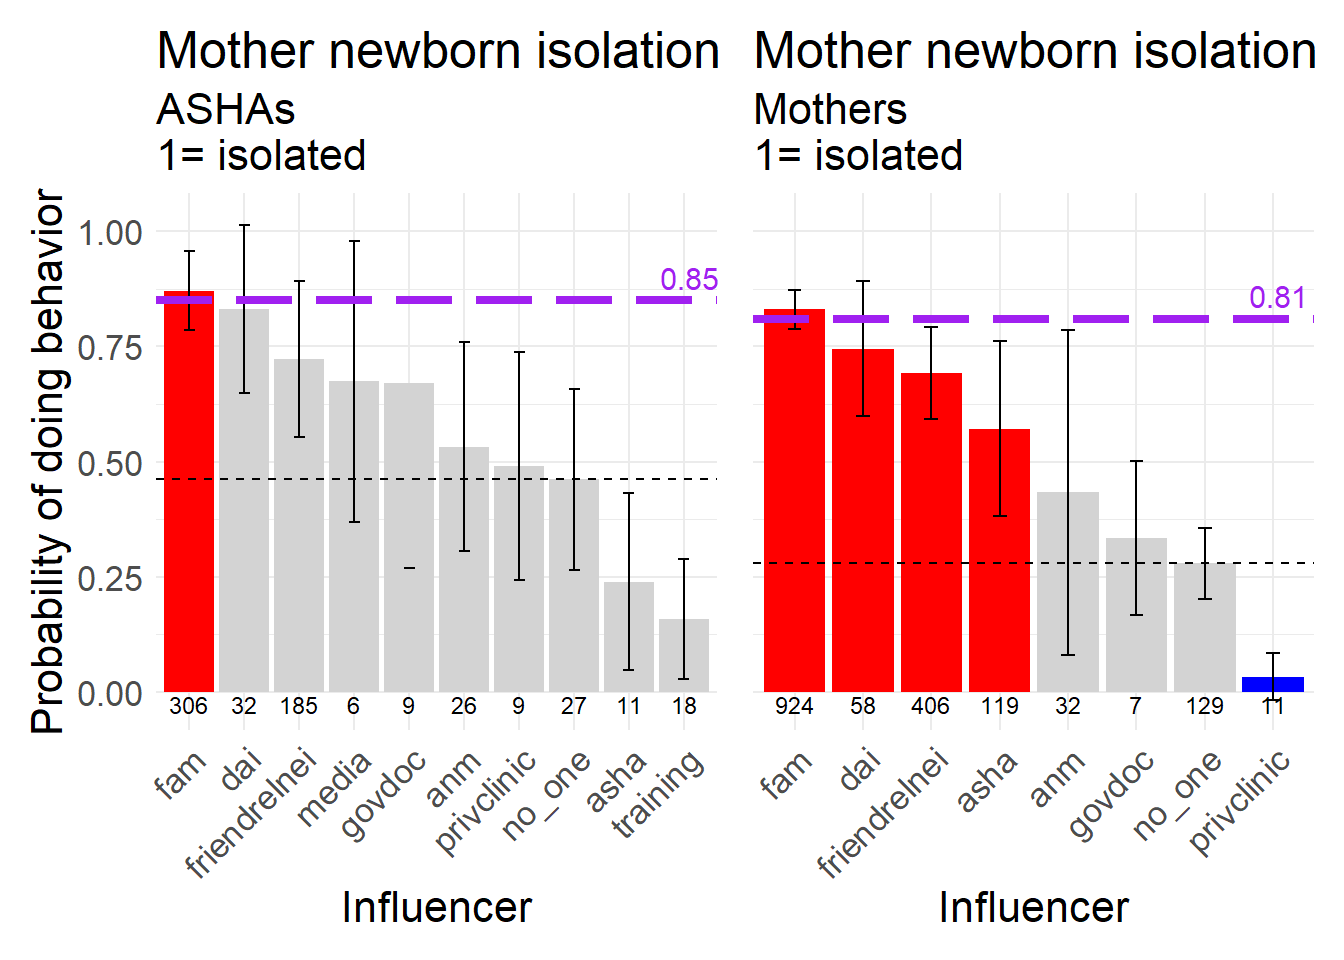 Mother and newborn isolating together after delivery, a neutral behavior, 1 = isolated.